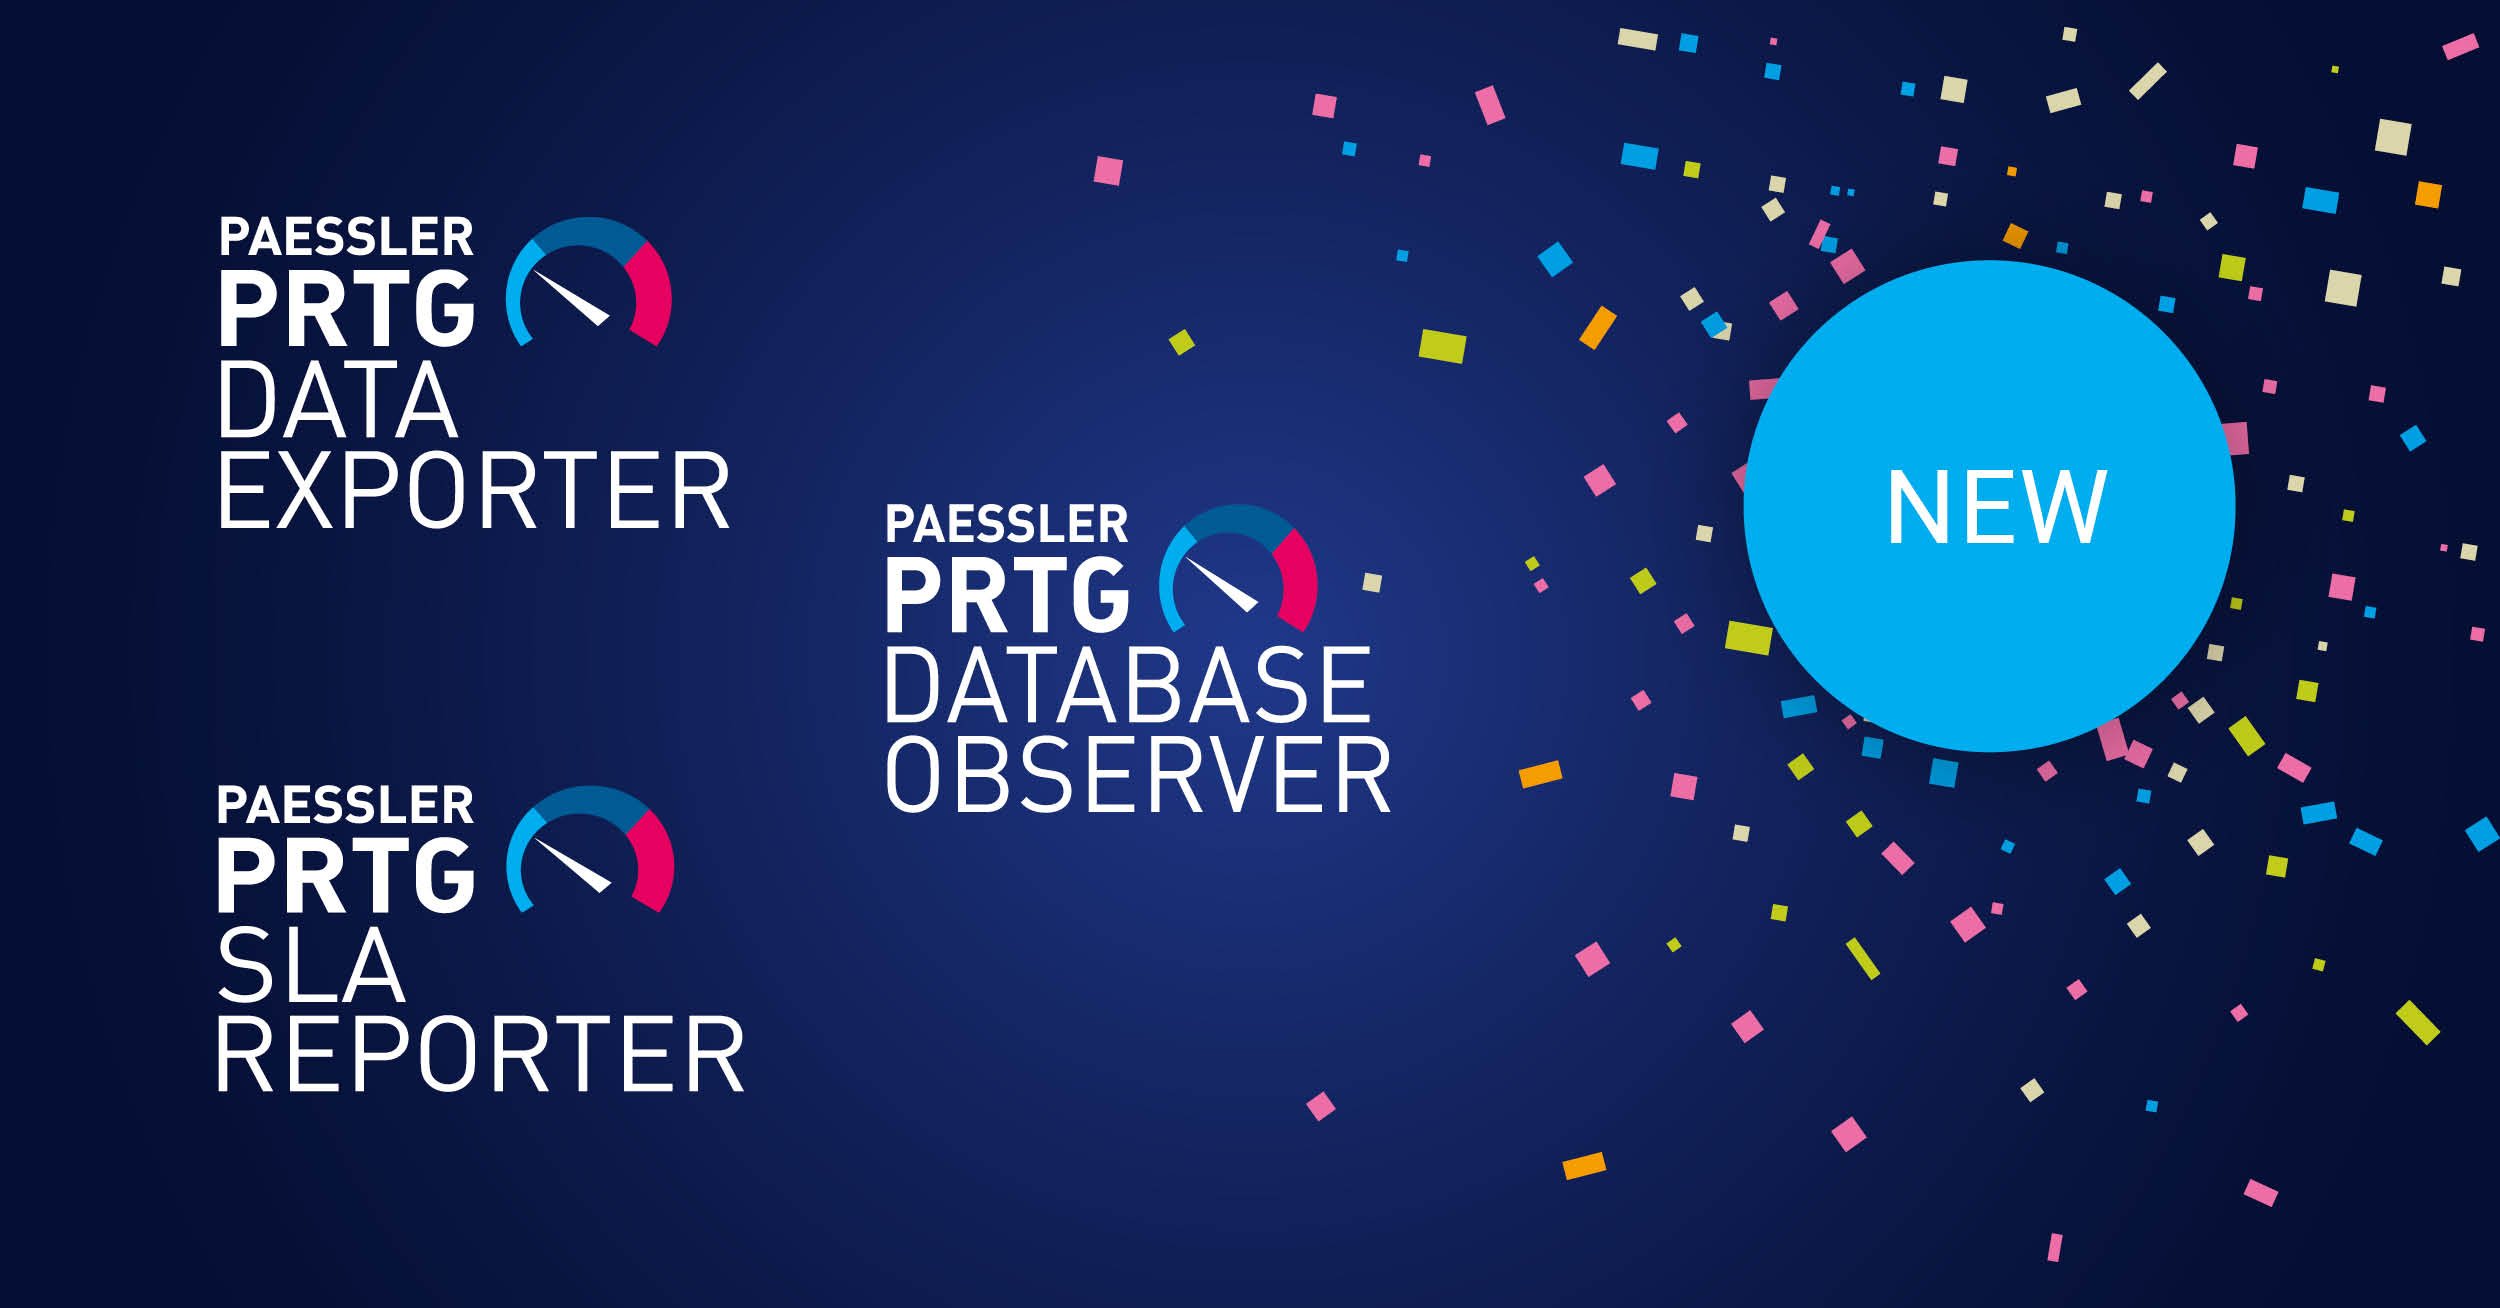 Discover our 3 latest Paessler PRTG product extensions